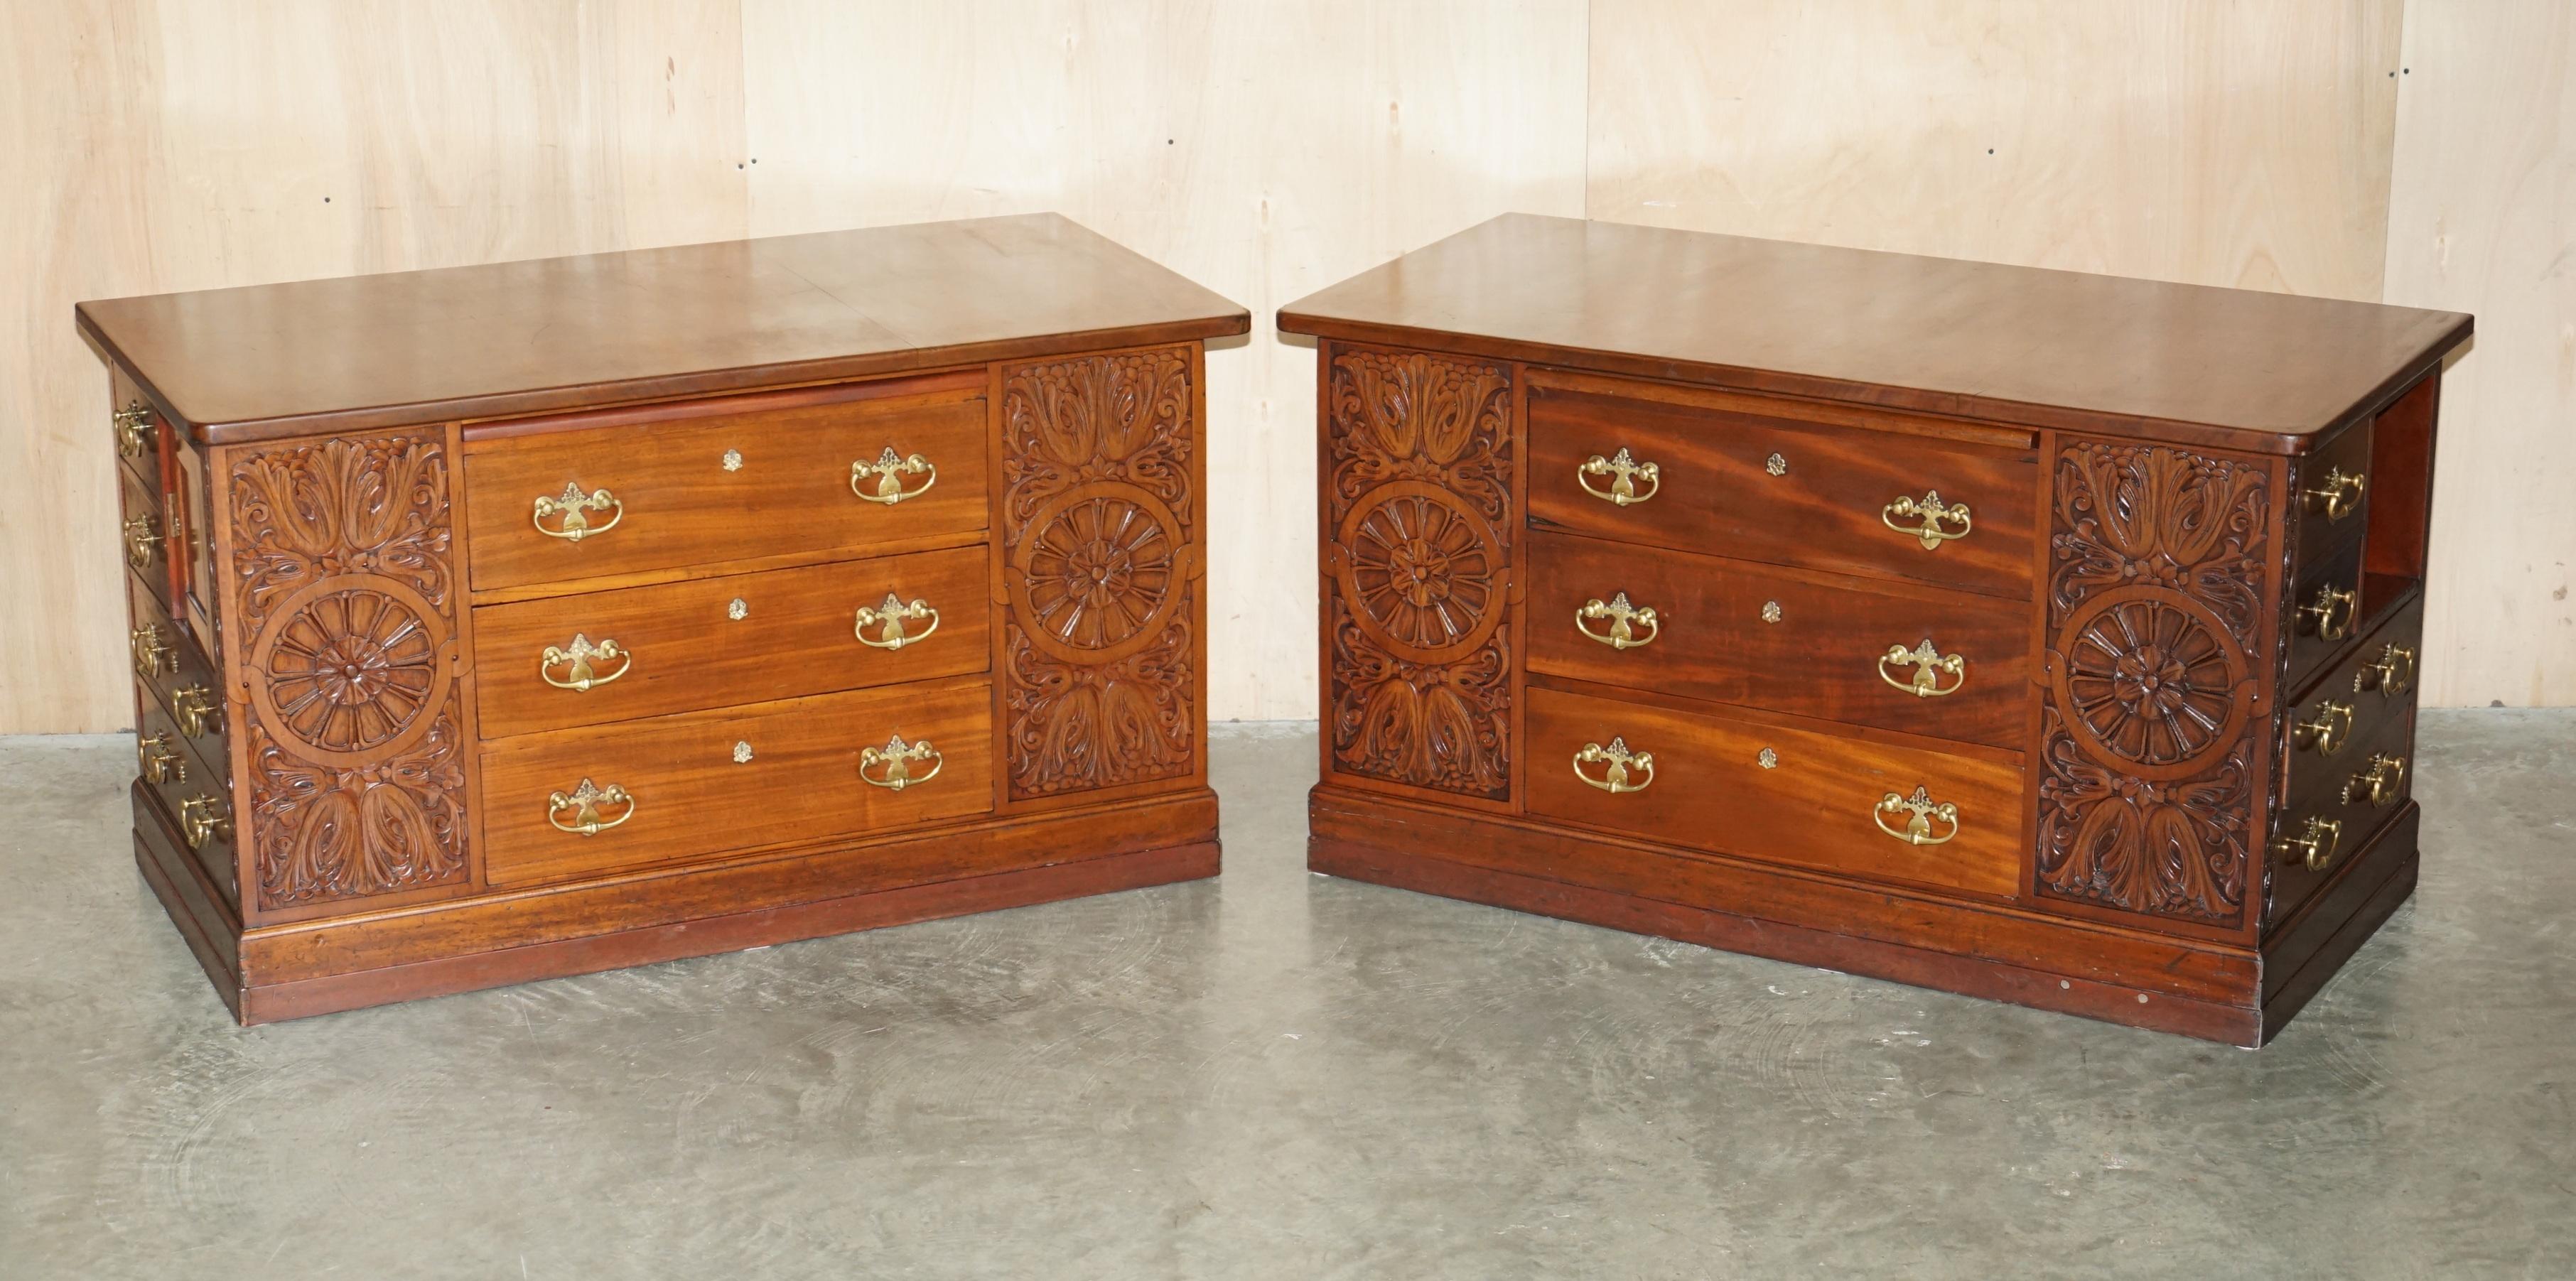 RIESIGE ANTIQUE VICTORIAN THOMAS CHIPPENDALE ESTATE DESK OR TWO SIDEBOARD DRAWERs im Angebot 6